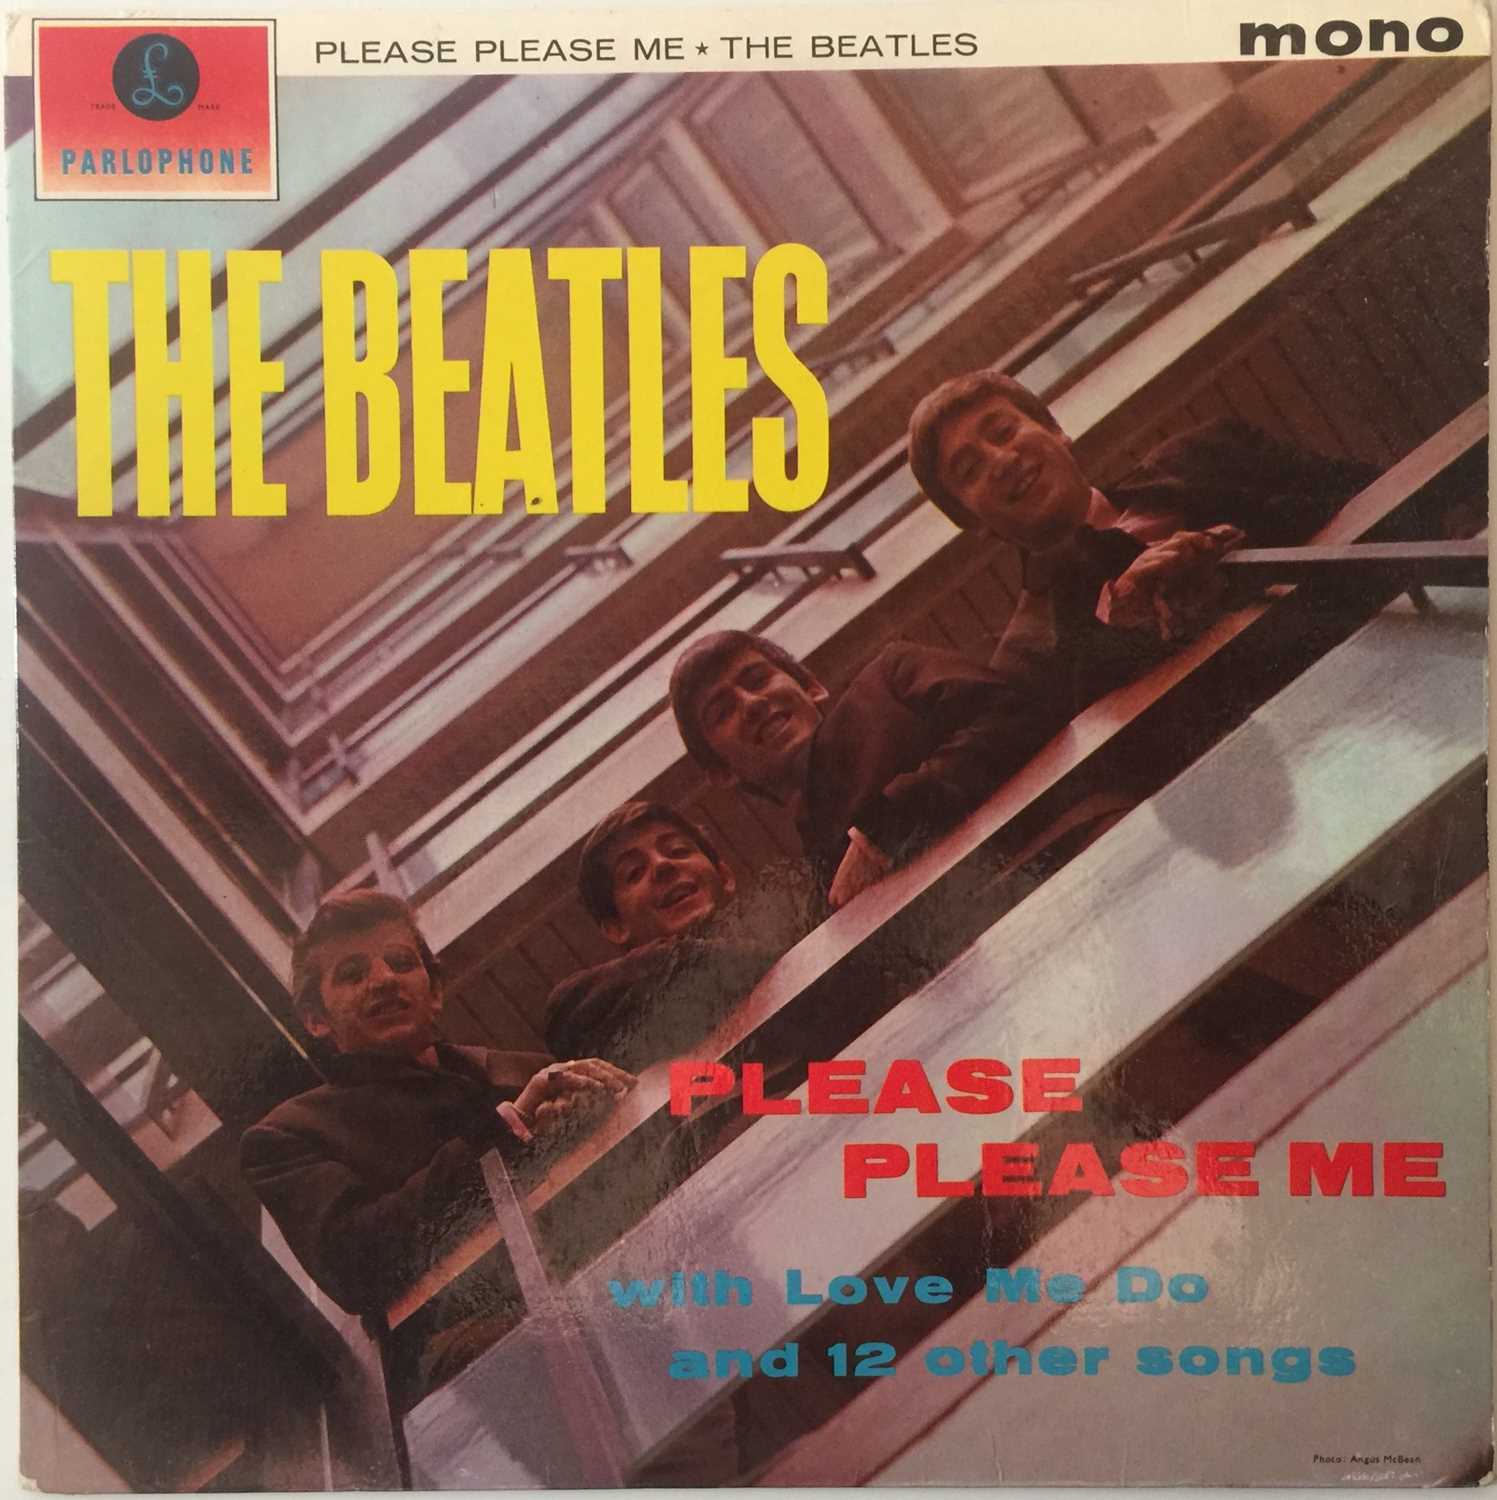 Lot 7 - The Beatles - Please Please Me LP (1st UK Mono Pressing 'Black And Gold'/2nd Printing Sleeve - PMC 1202)